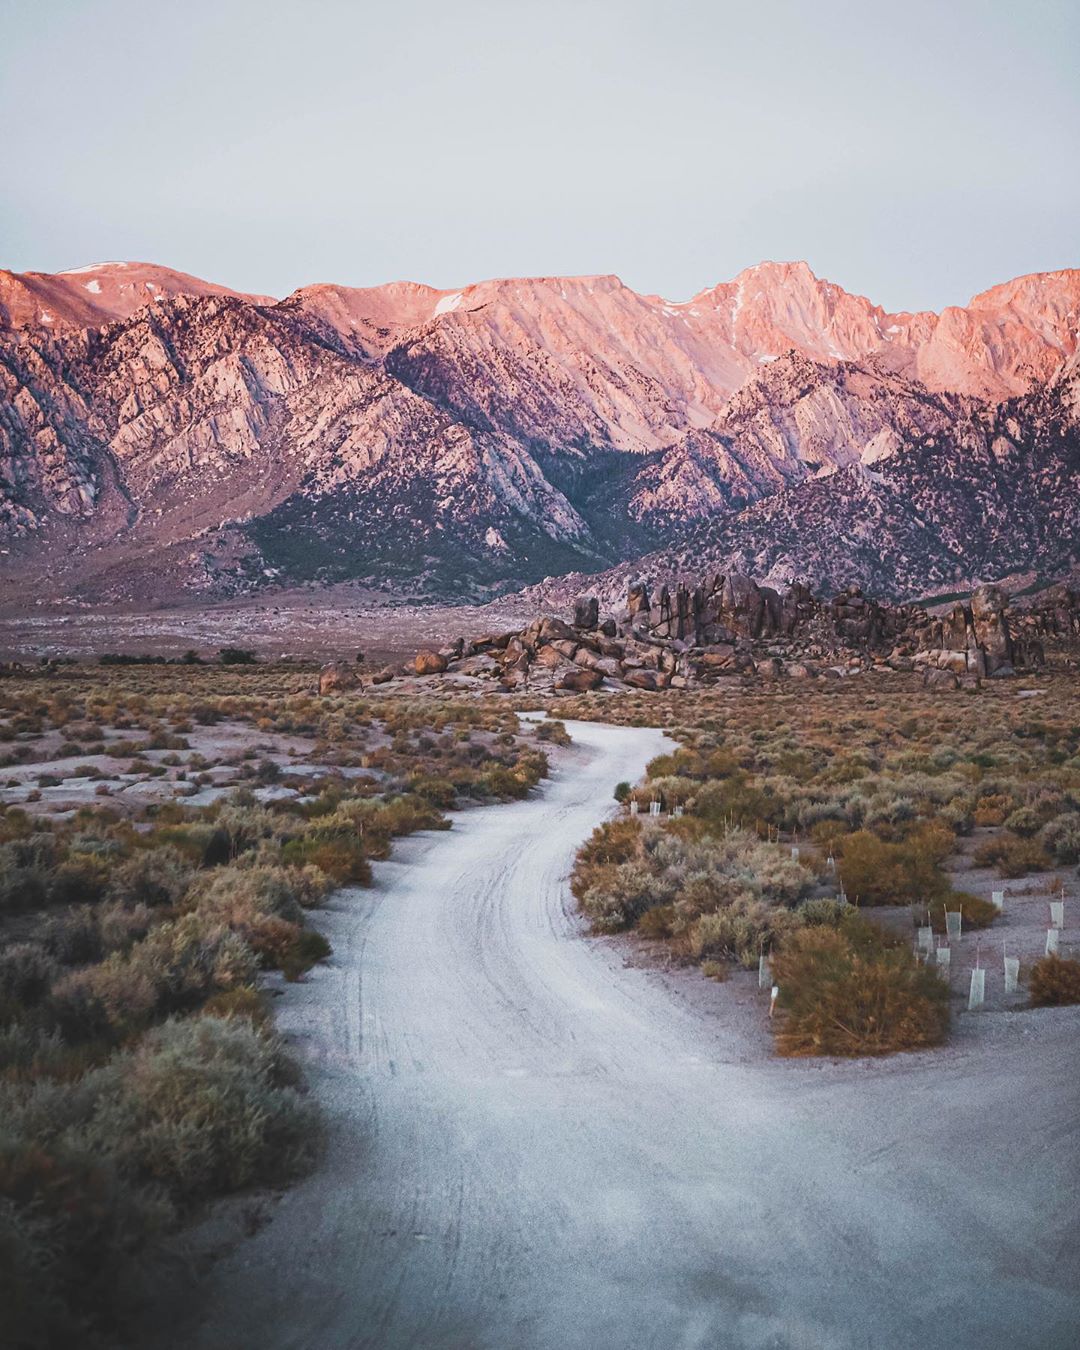 Trail with the mountains in the background during sunrise at Alabama Hills. Photo by Instagram user @ek_photos